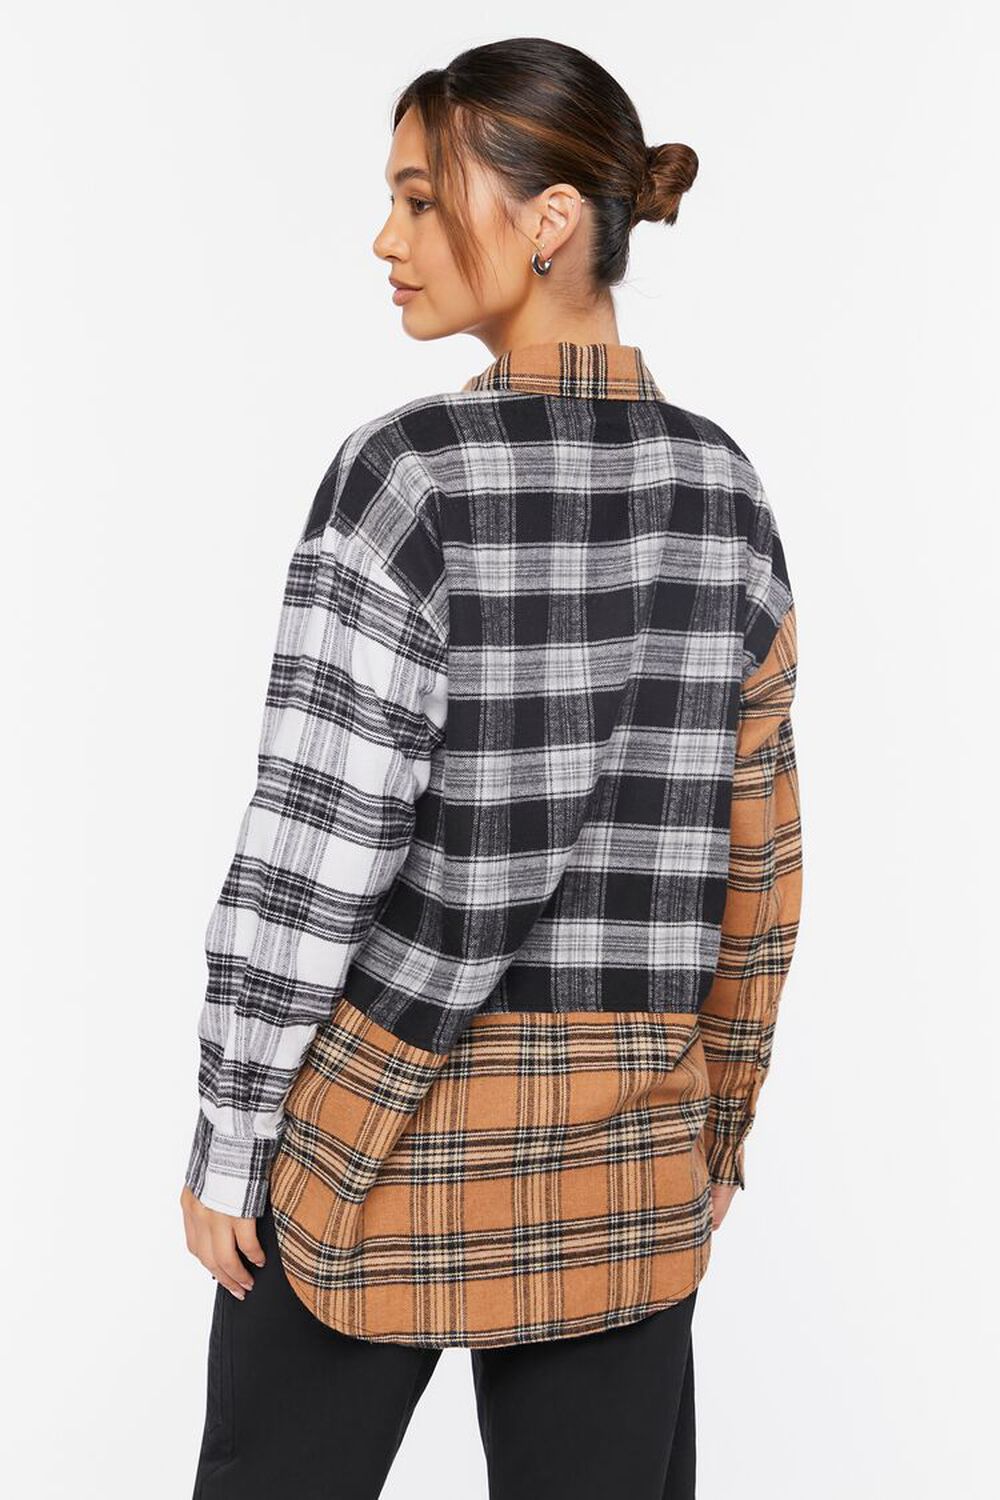 WHITE/MULTI Reworked Plaid Flannel Shirt, image 3